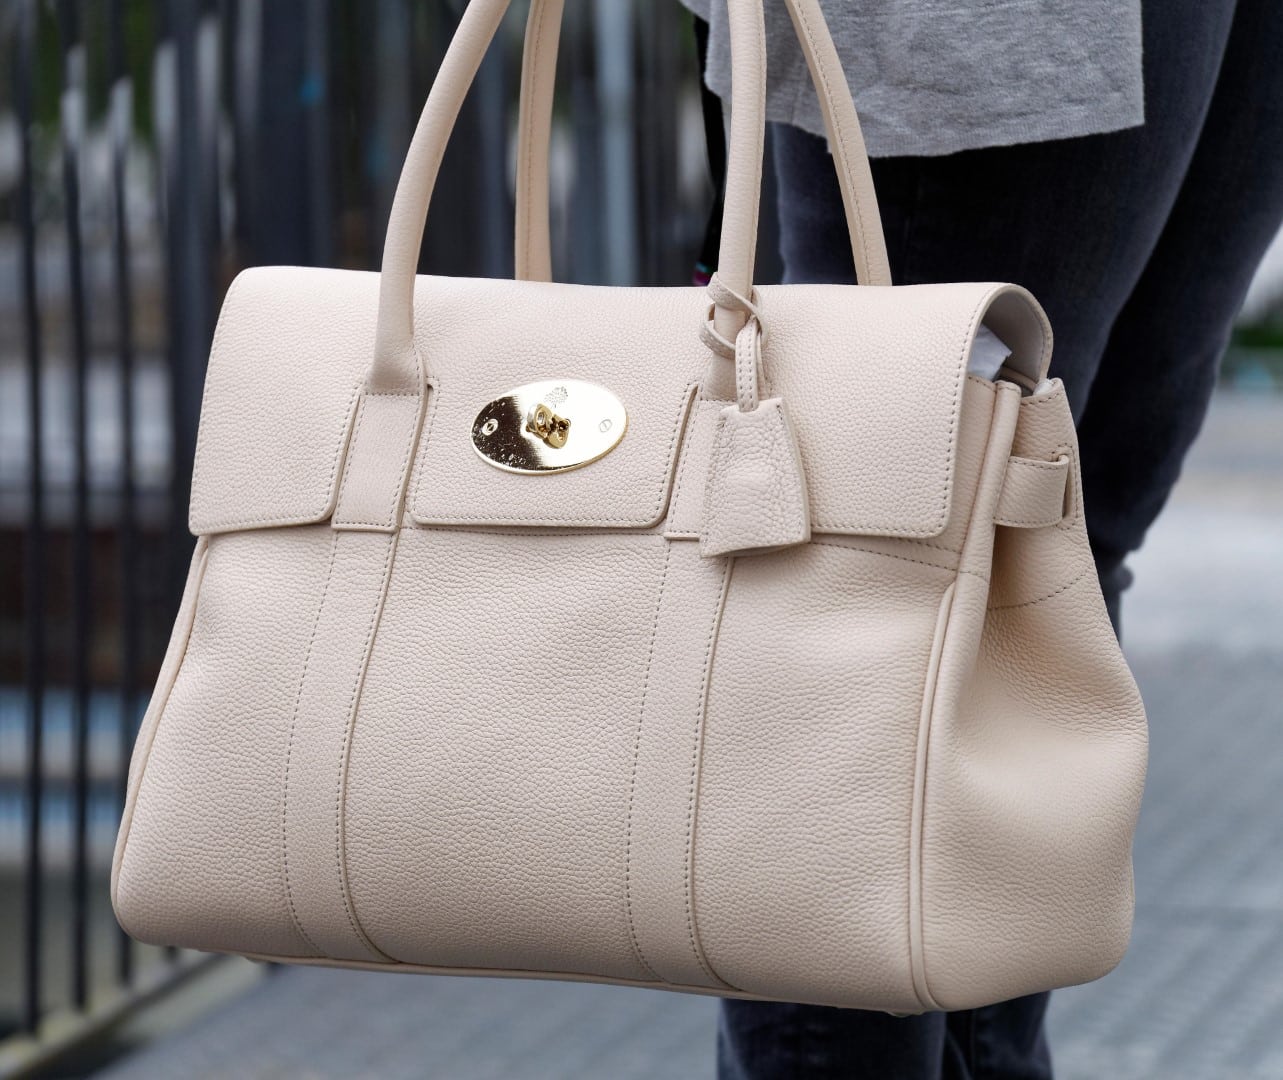 Mulberry Bayswater Handbag, Mulberry is a fashion company founded in the United Kingdom in 1971